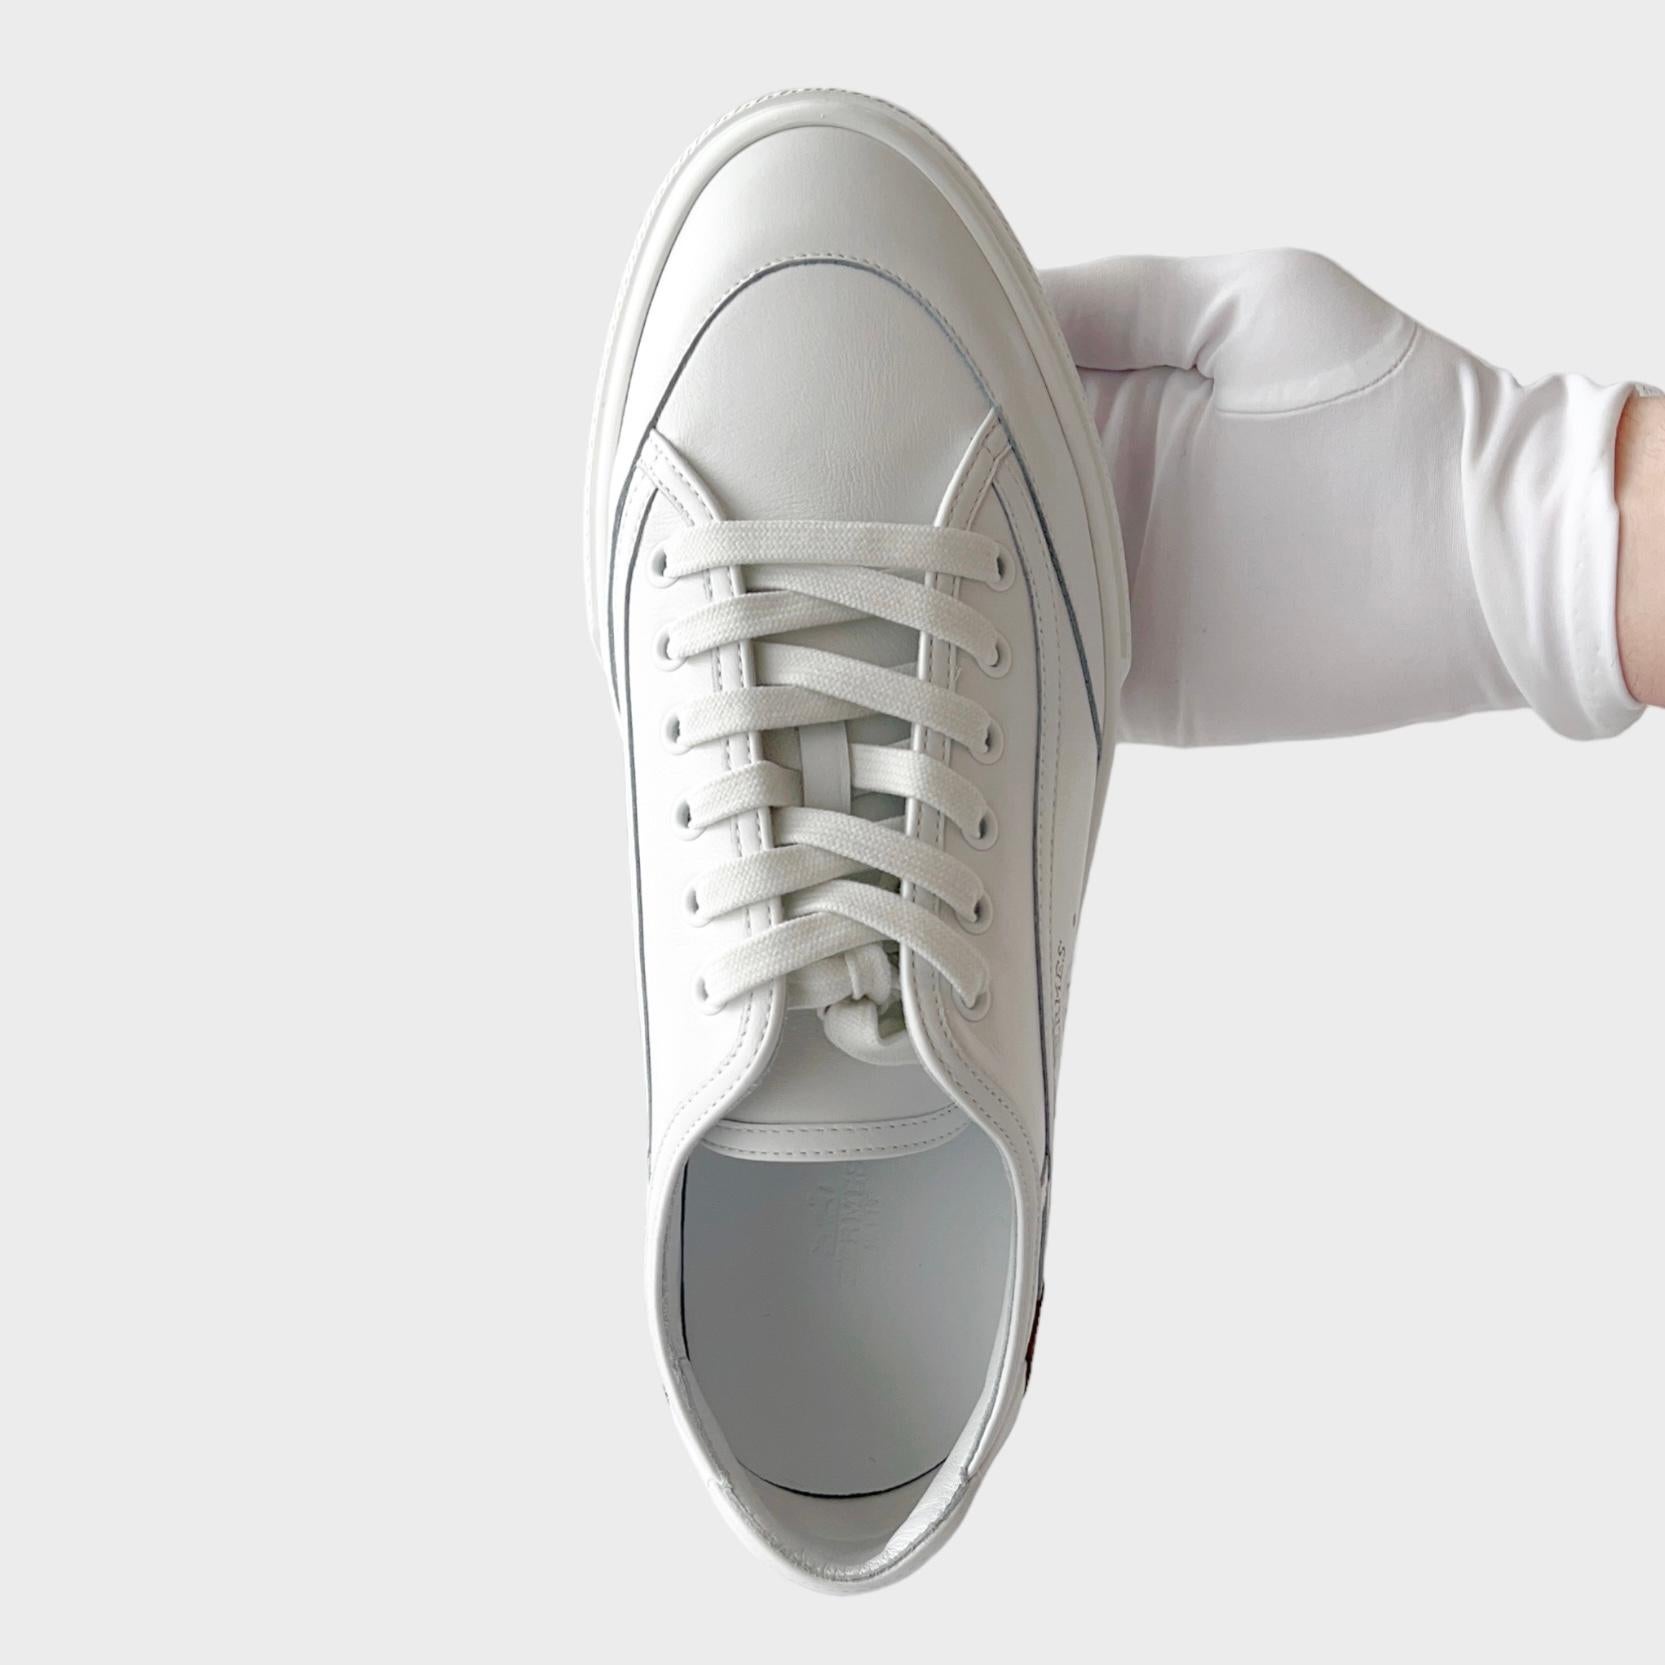 Shop the Hermes Get Sneaker, a comfortable everyday classic sneaker. This pair of Men's Get Sneakers comes in White complimented by Gold leather detailing at the heel. It features a new 'H' emblem on the side. The sneaker comes in calfskin. This is